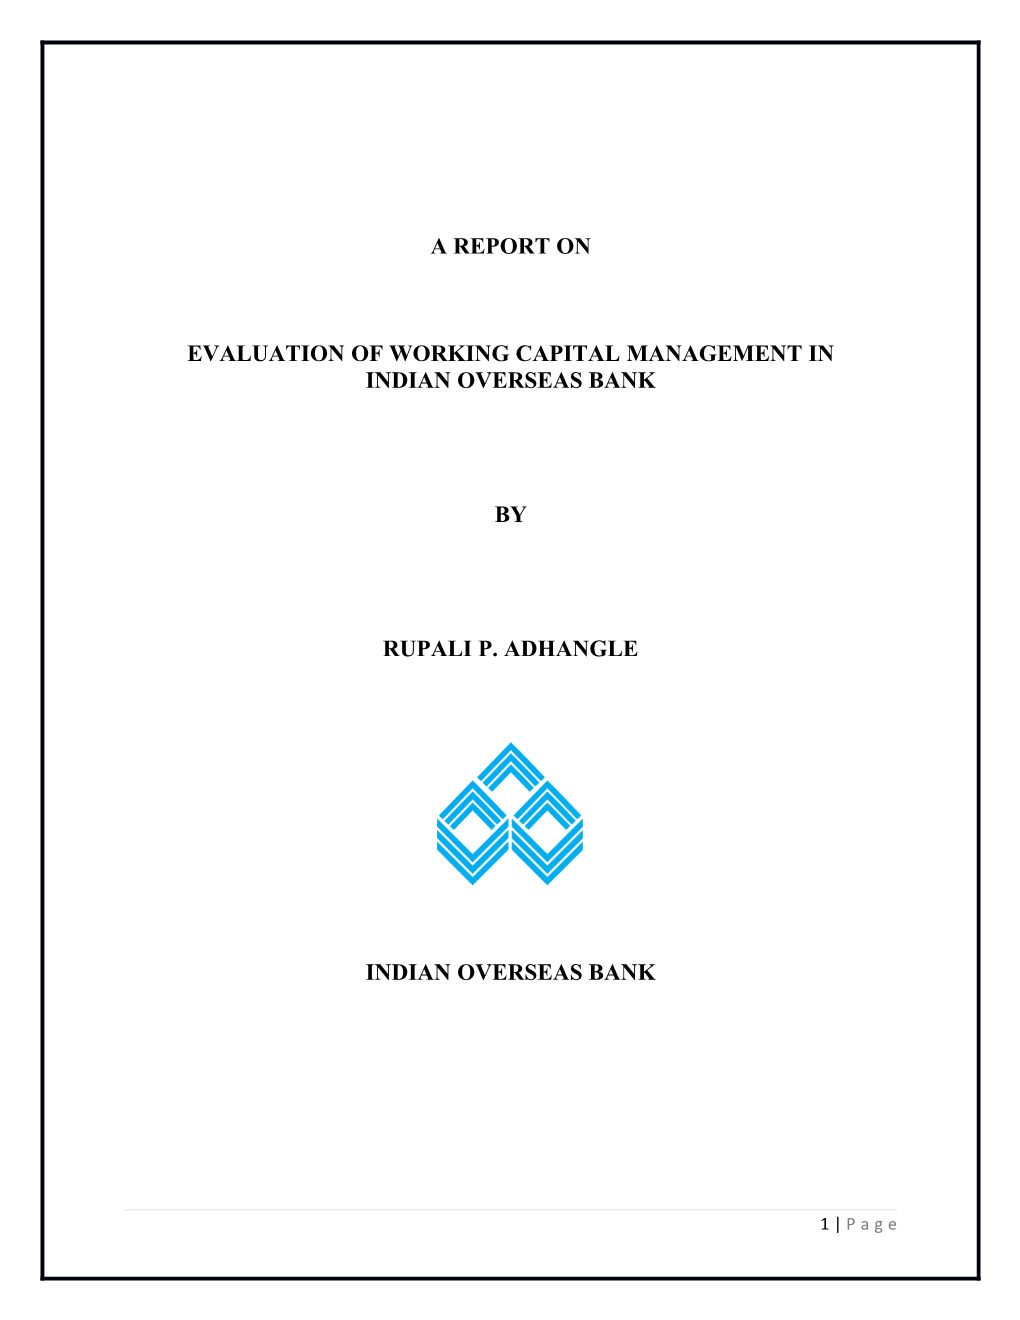 Evaluation of Working Capital Management In